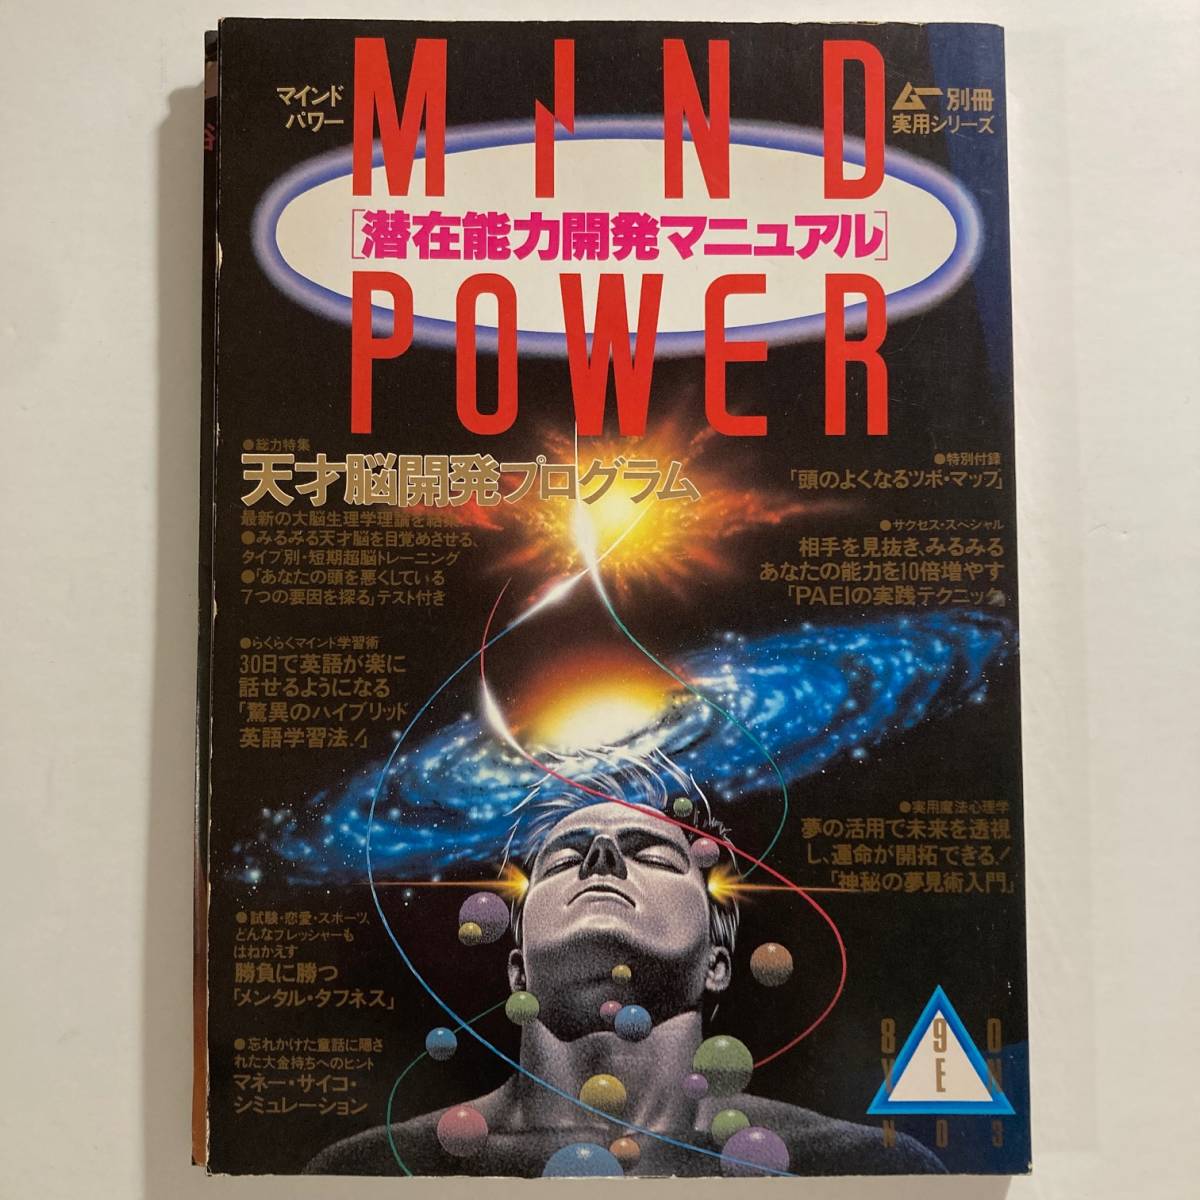  secondhand book *m- separate volume practical use series ma India power .. ability development manual No.3 special appendix attaching *** anonymity delivery possible 